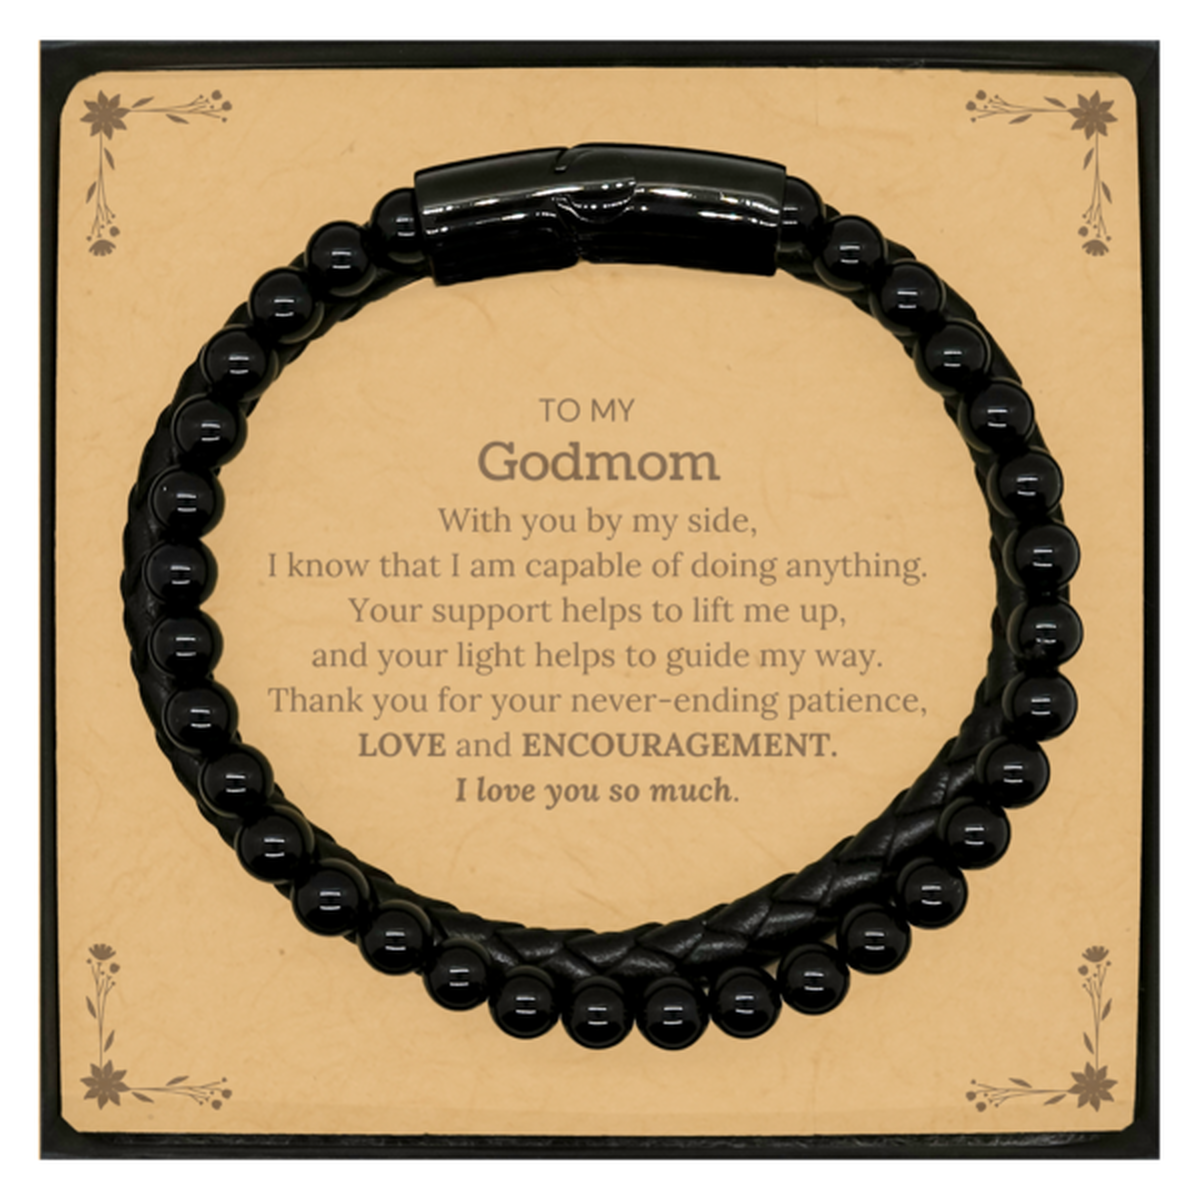 Appreciation Godmom Stone Leather Bracelets Gifts, To My Godmom Birthday Christmas Wedding Keepsake Gifts for Godmom With you by my side, I know that I am capable of doing anything. I love you so much